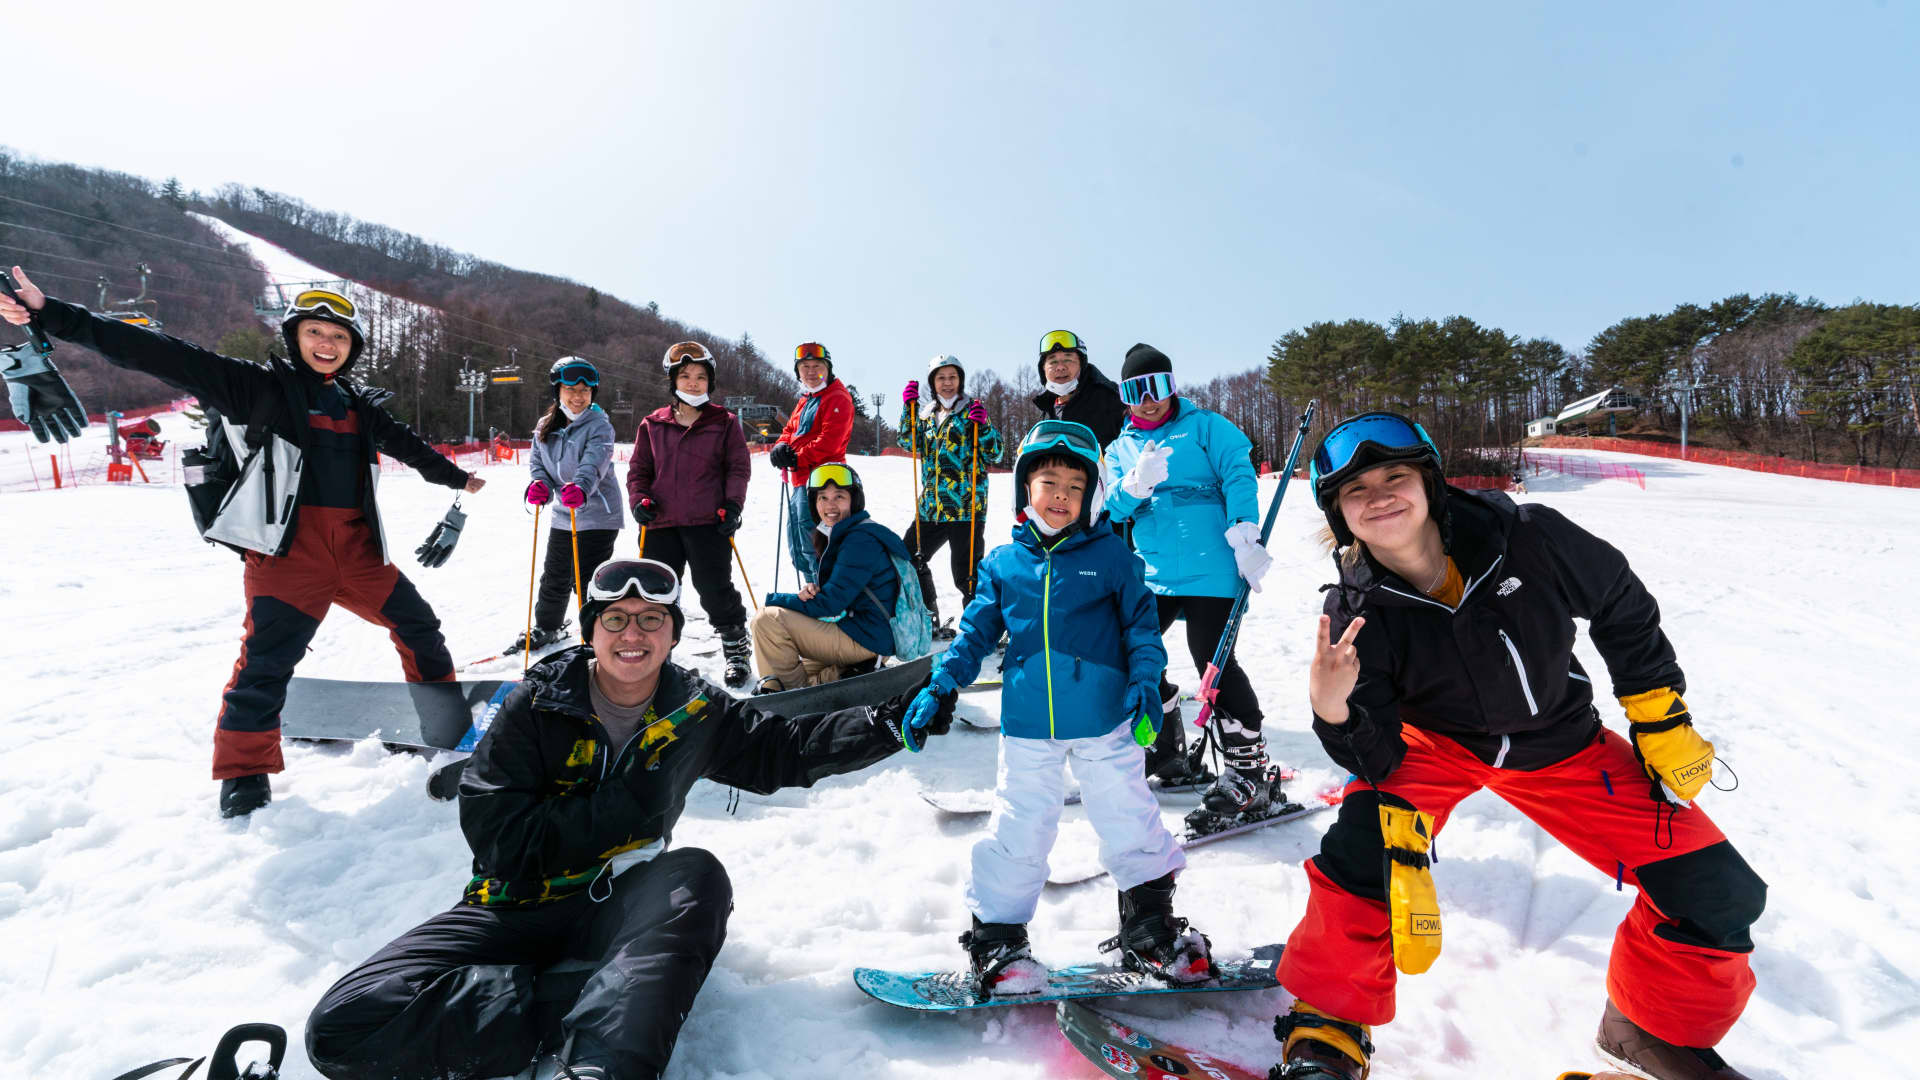 CNBC's Abigail Ng (6th from left) joined a small group tour from Singapore to South Korea in March 2022.